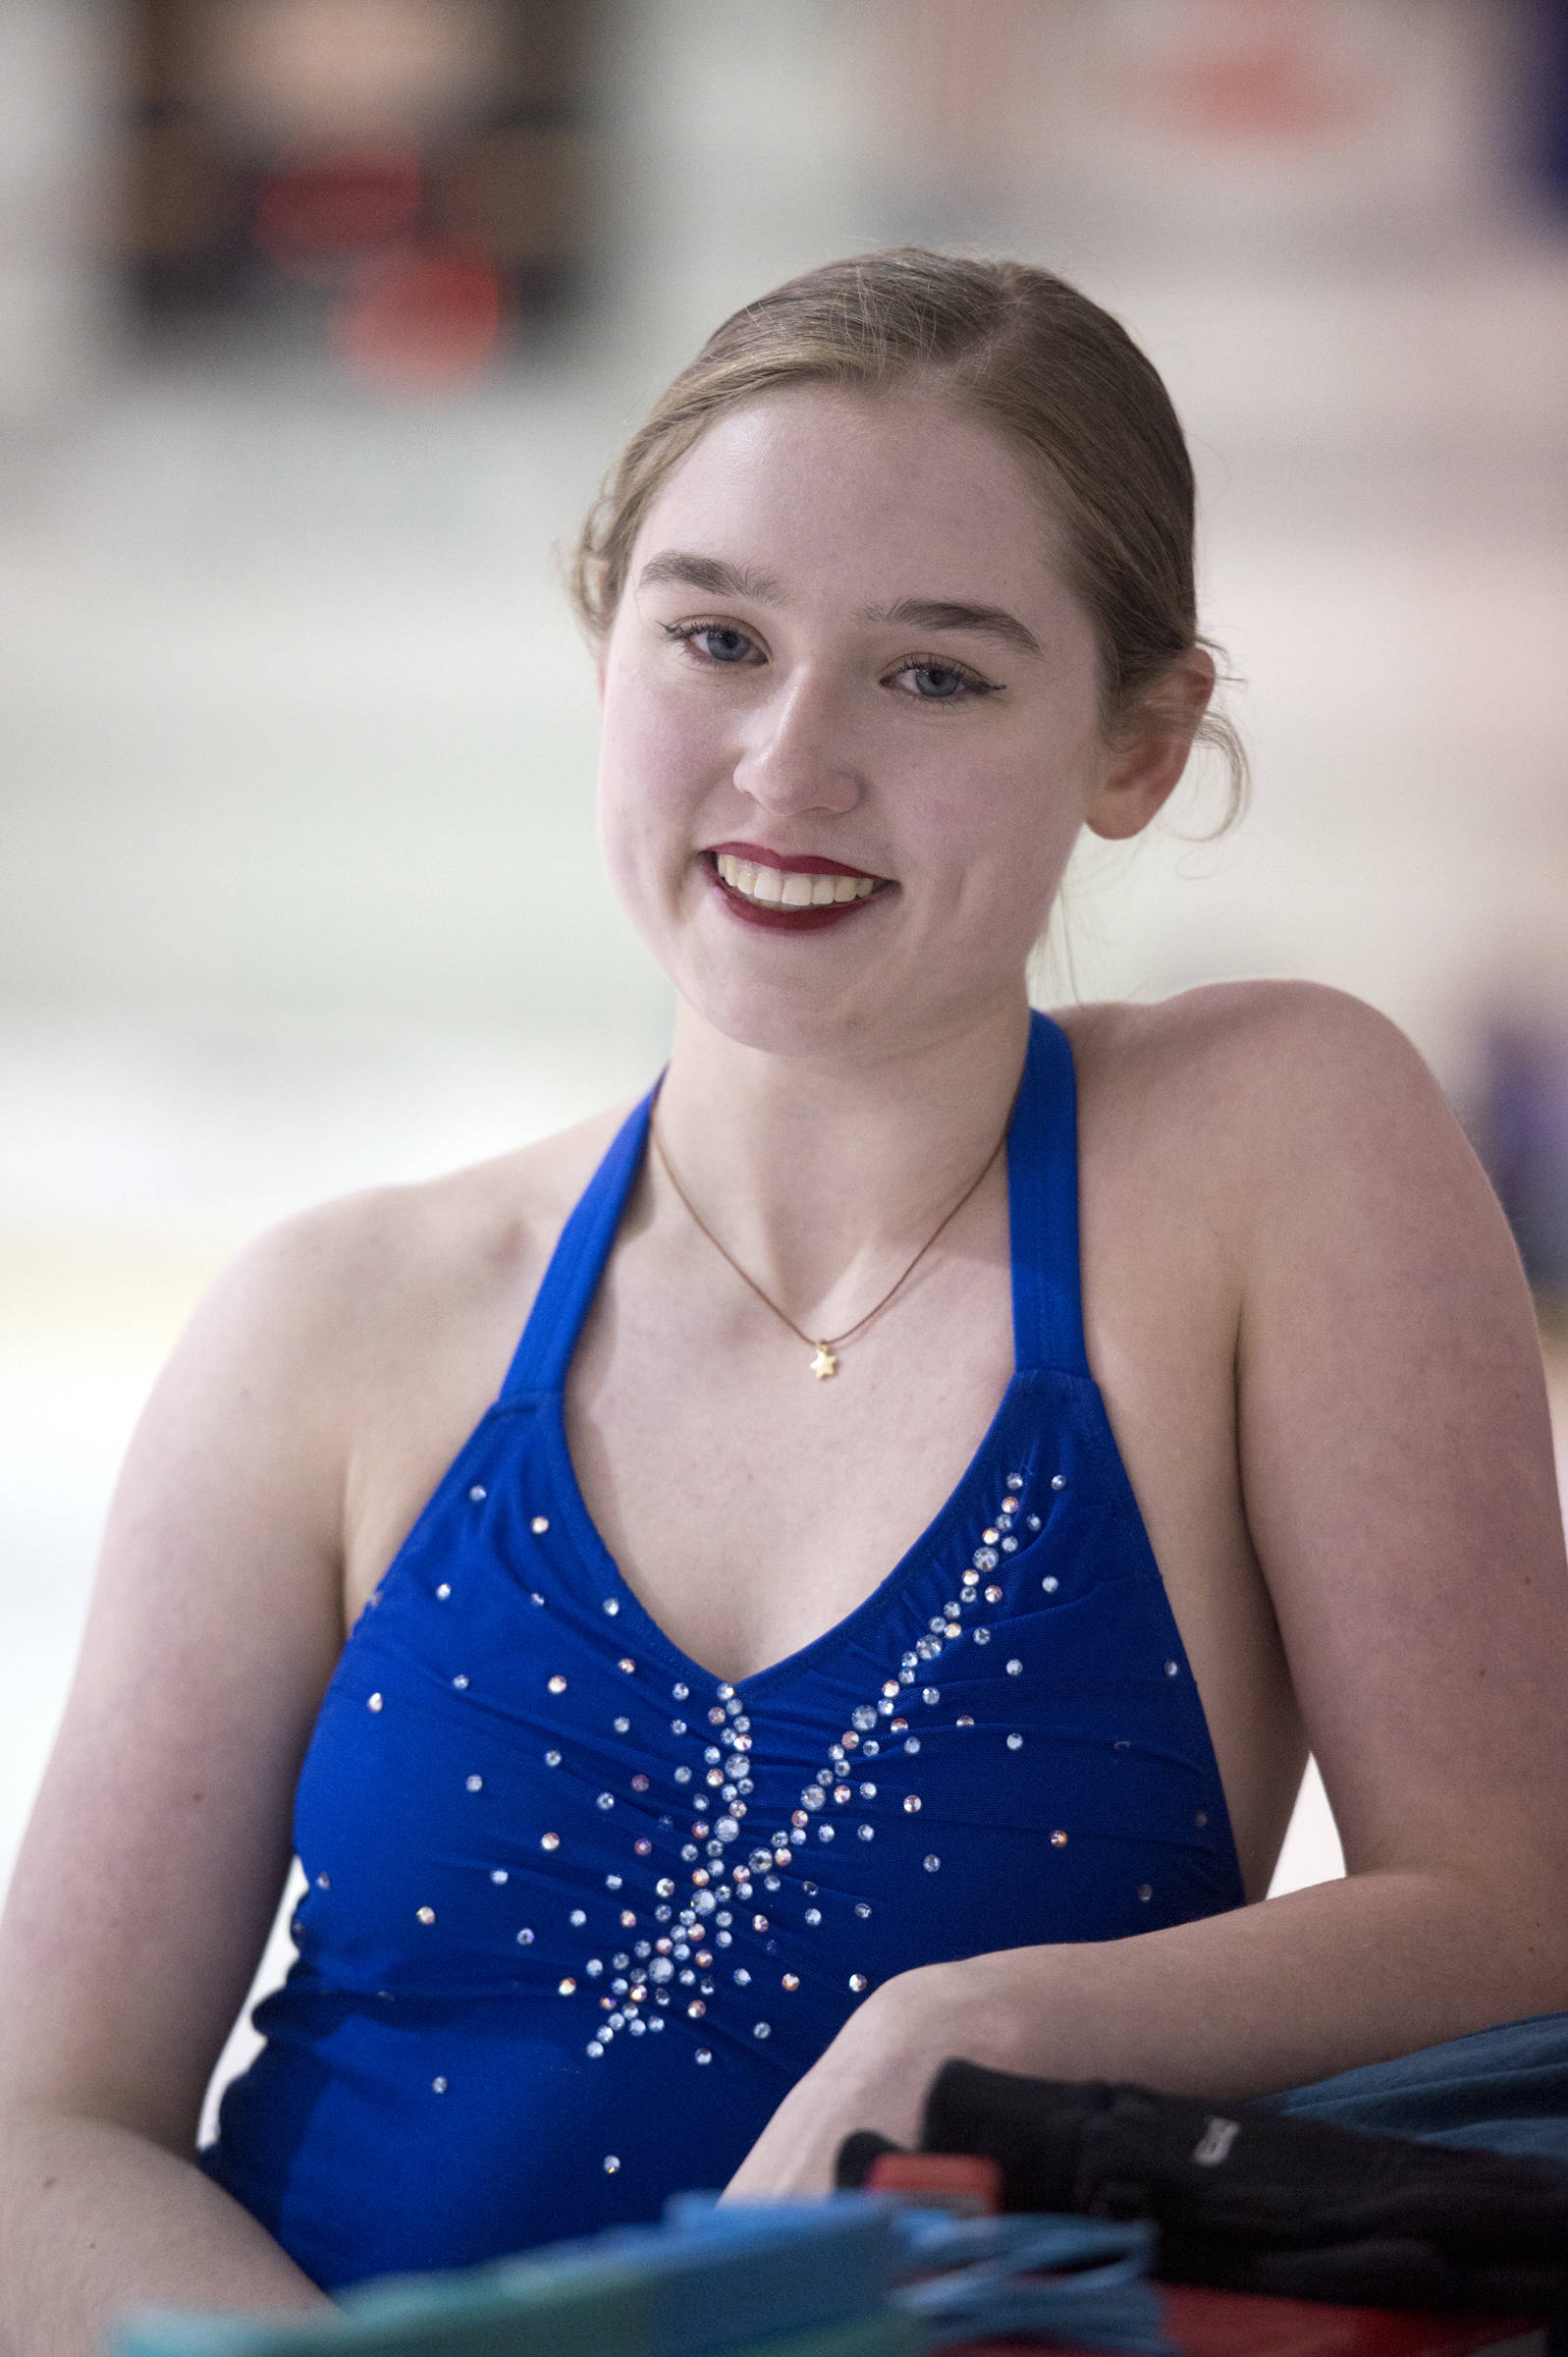 Laurie Balstad, 18, a member of the Juneau Skating Club, stops to pose for a picture during practice at Treadwell Arena on Friday, March 3, 2017. (Michael Penn | Juneau Empire)